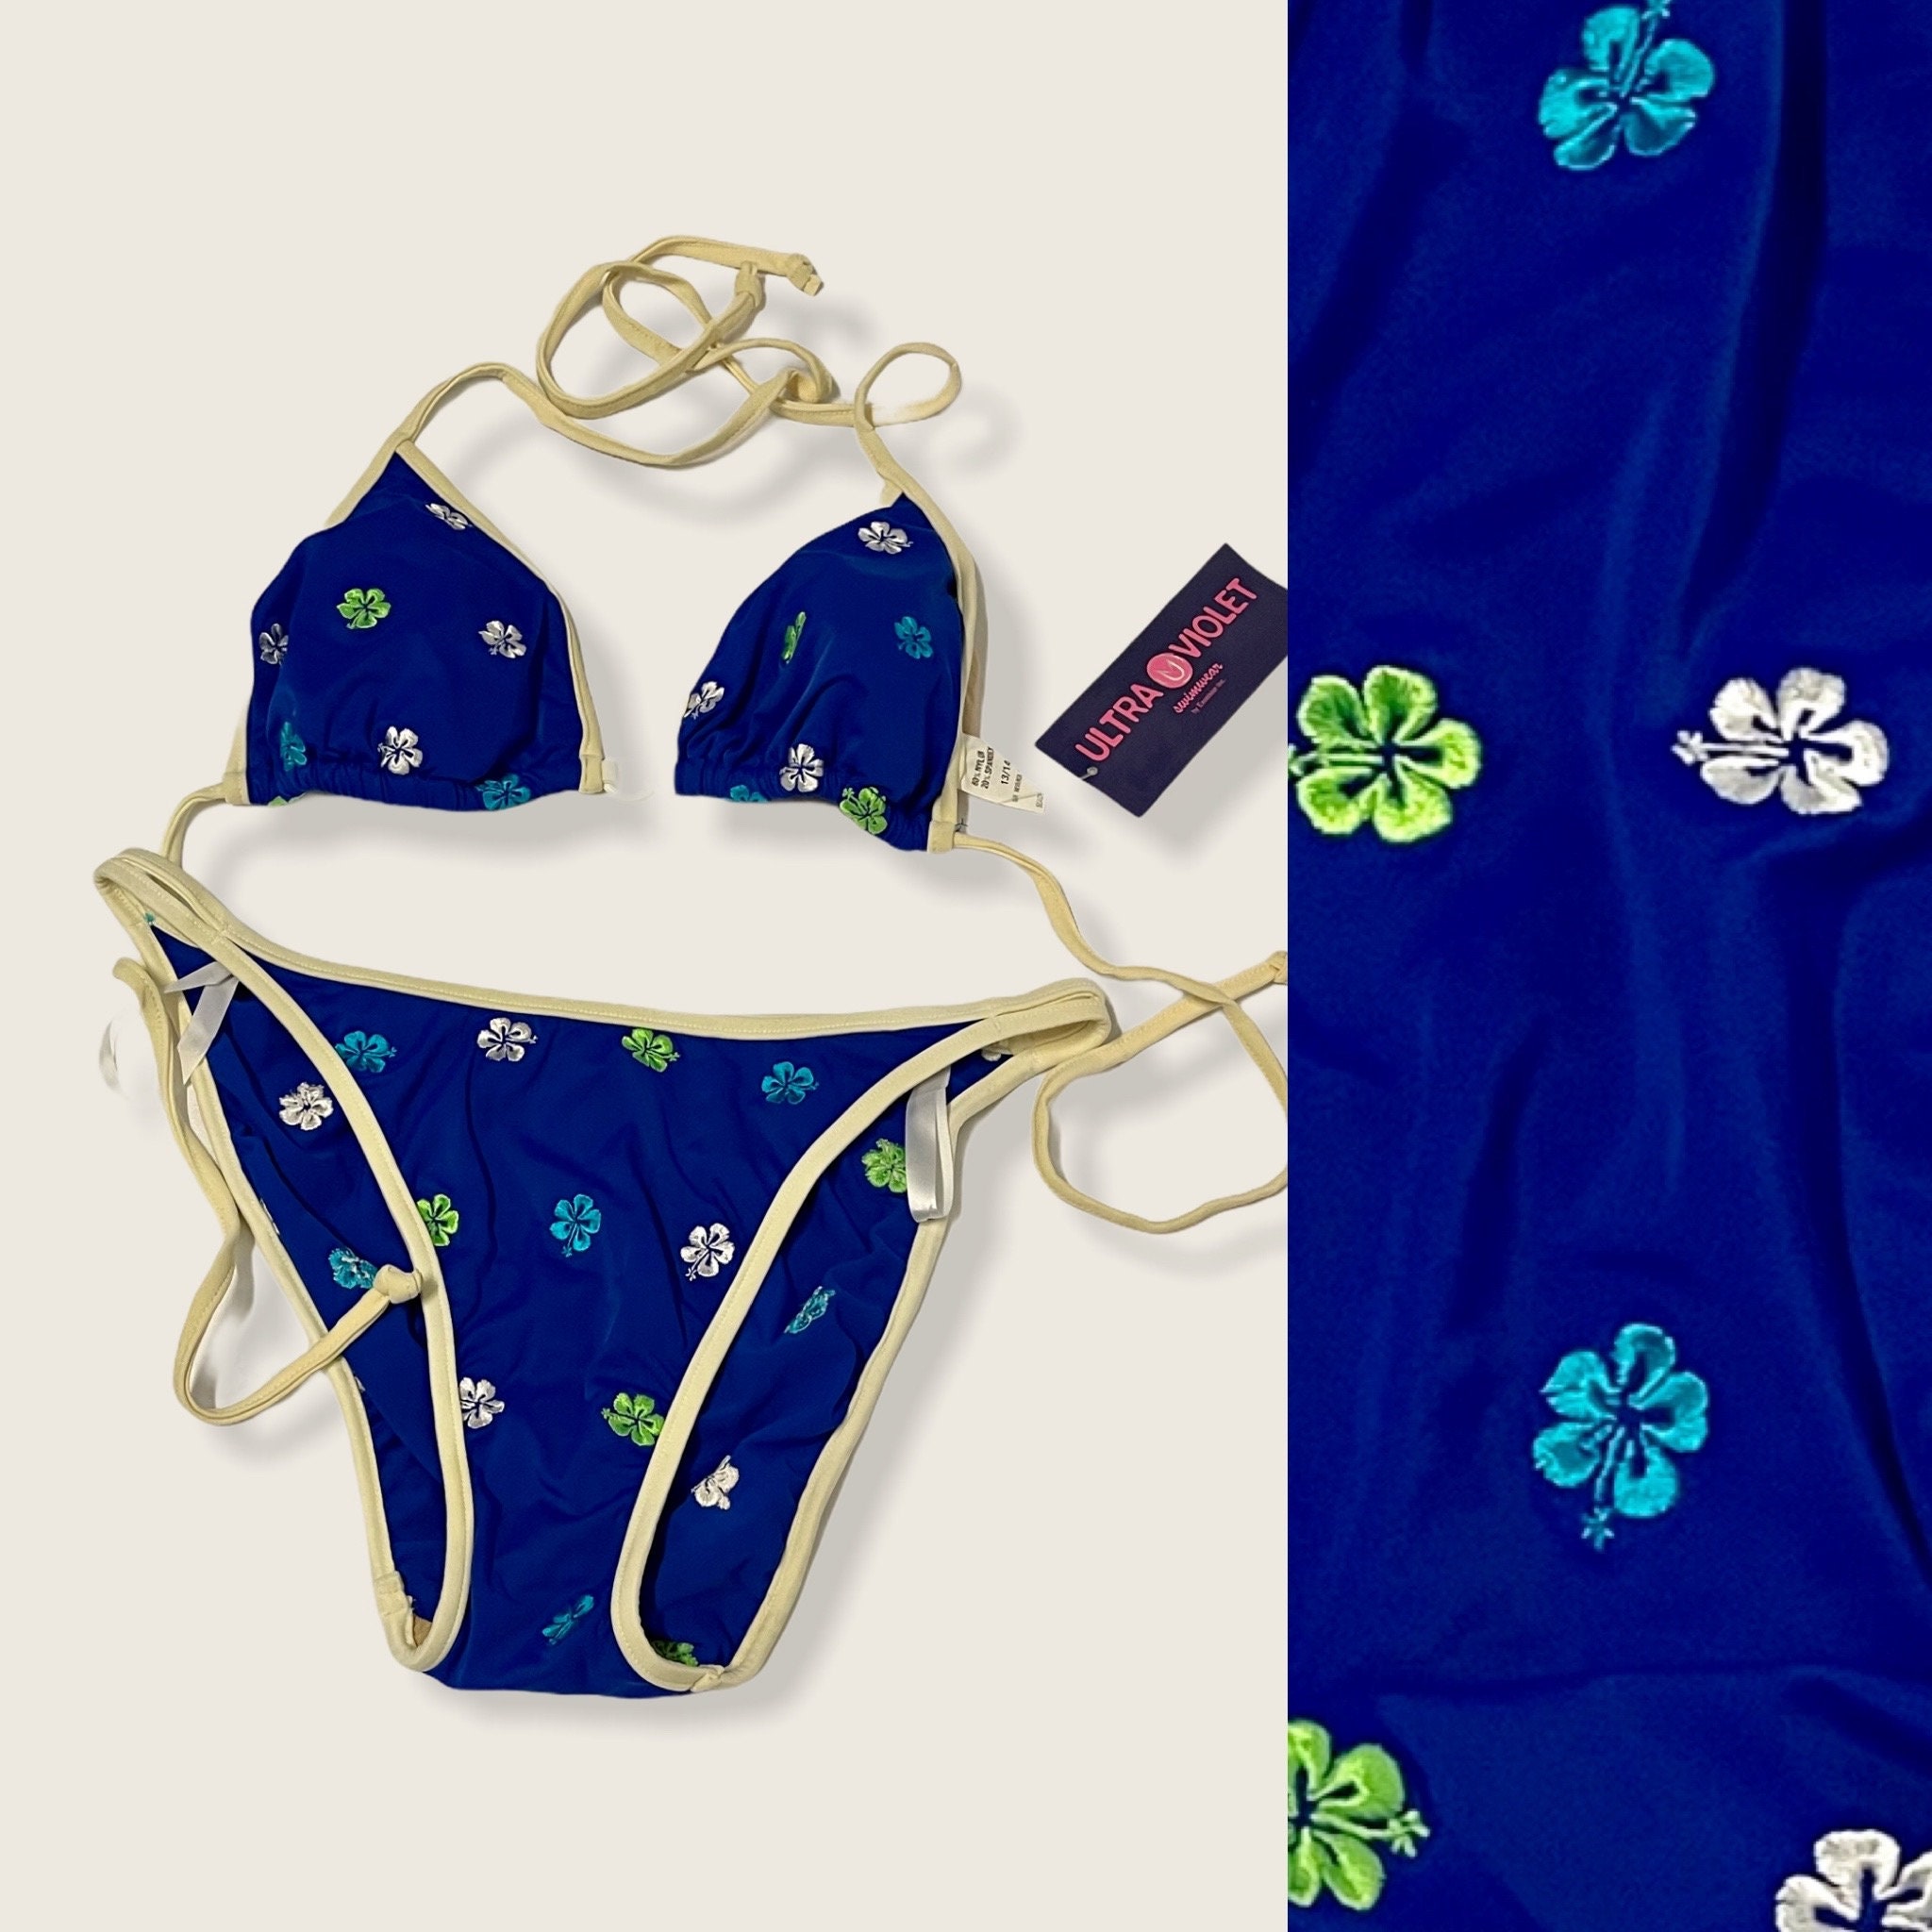 THE RETRO PADDED TRIANGLE BIKINI in FRENCH BLUE TERRY CLOTH